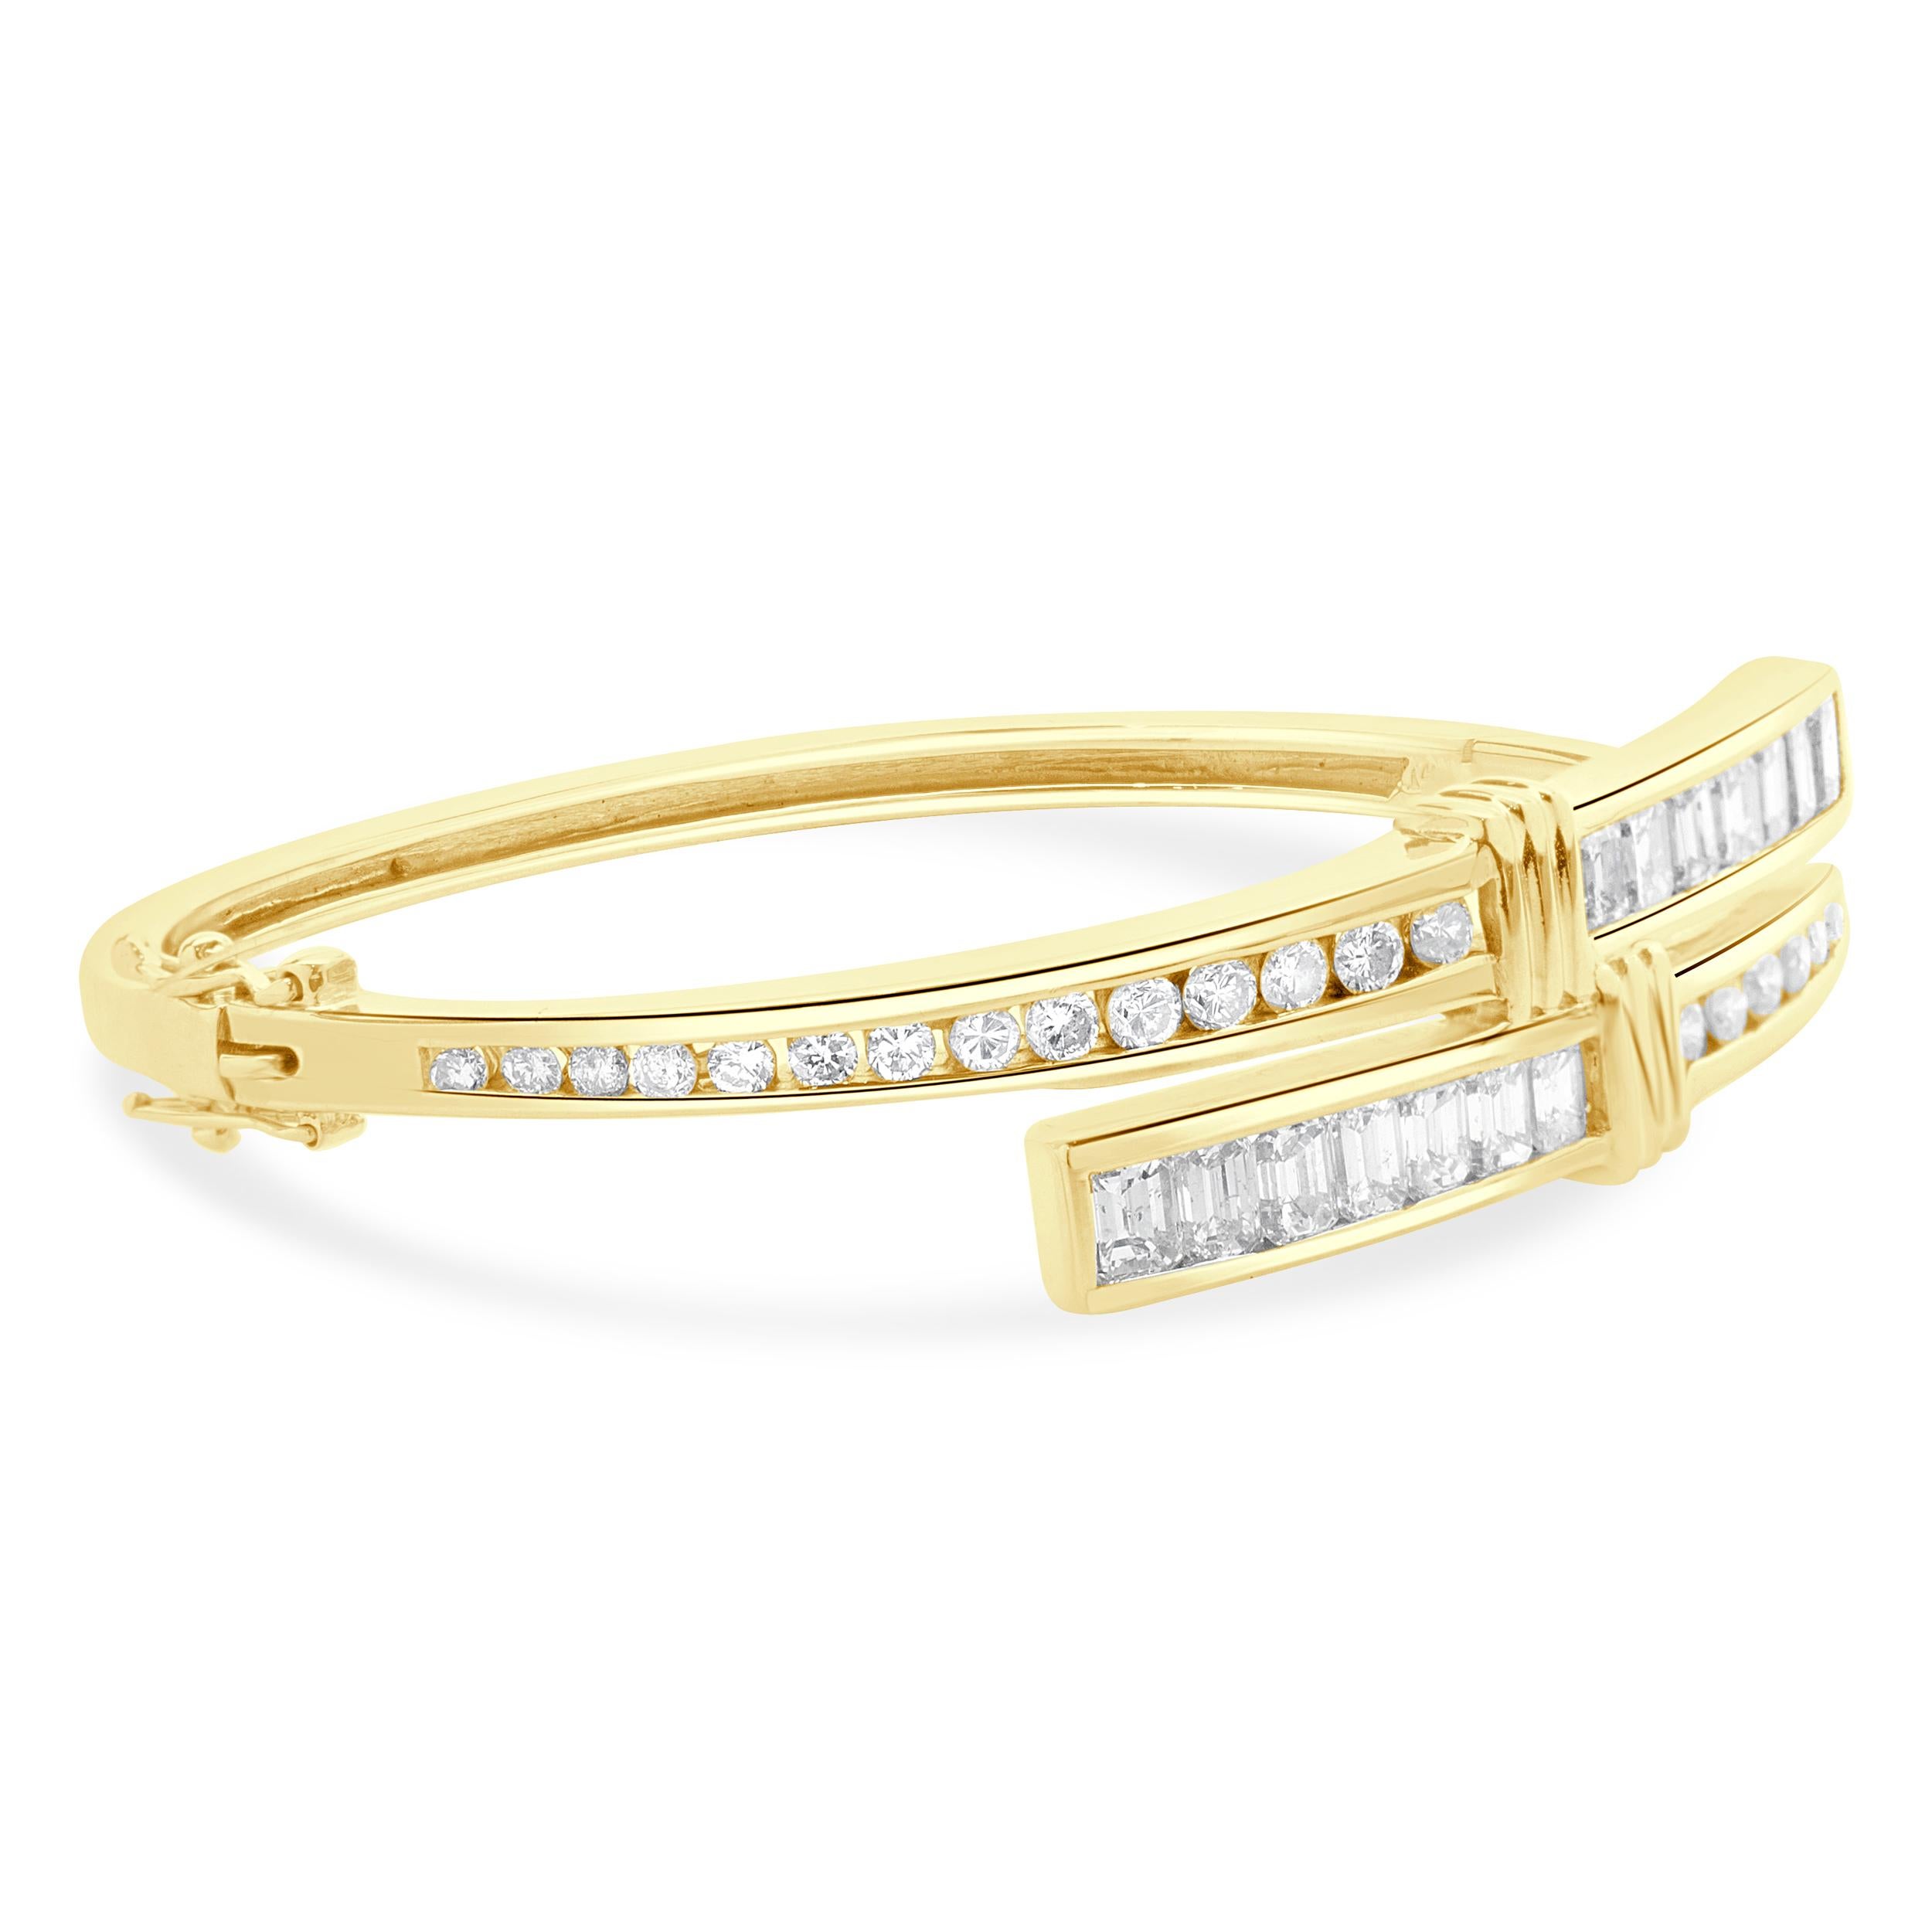 Designer: custom design
Material: 14K yellow gold
Diamond: 42 round brilliant cut = 2.10cttw
Color: H
Clarity: SI1
Dimensions: bracelet will fit up to a 6.5-inch wrist
Weight: 20.70 grams
